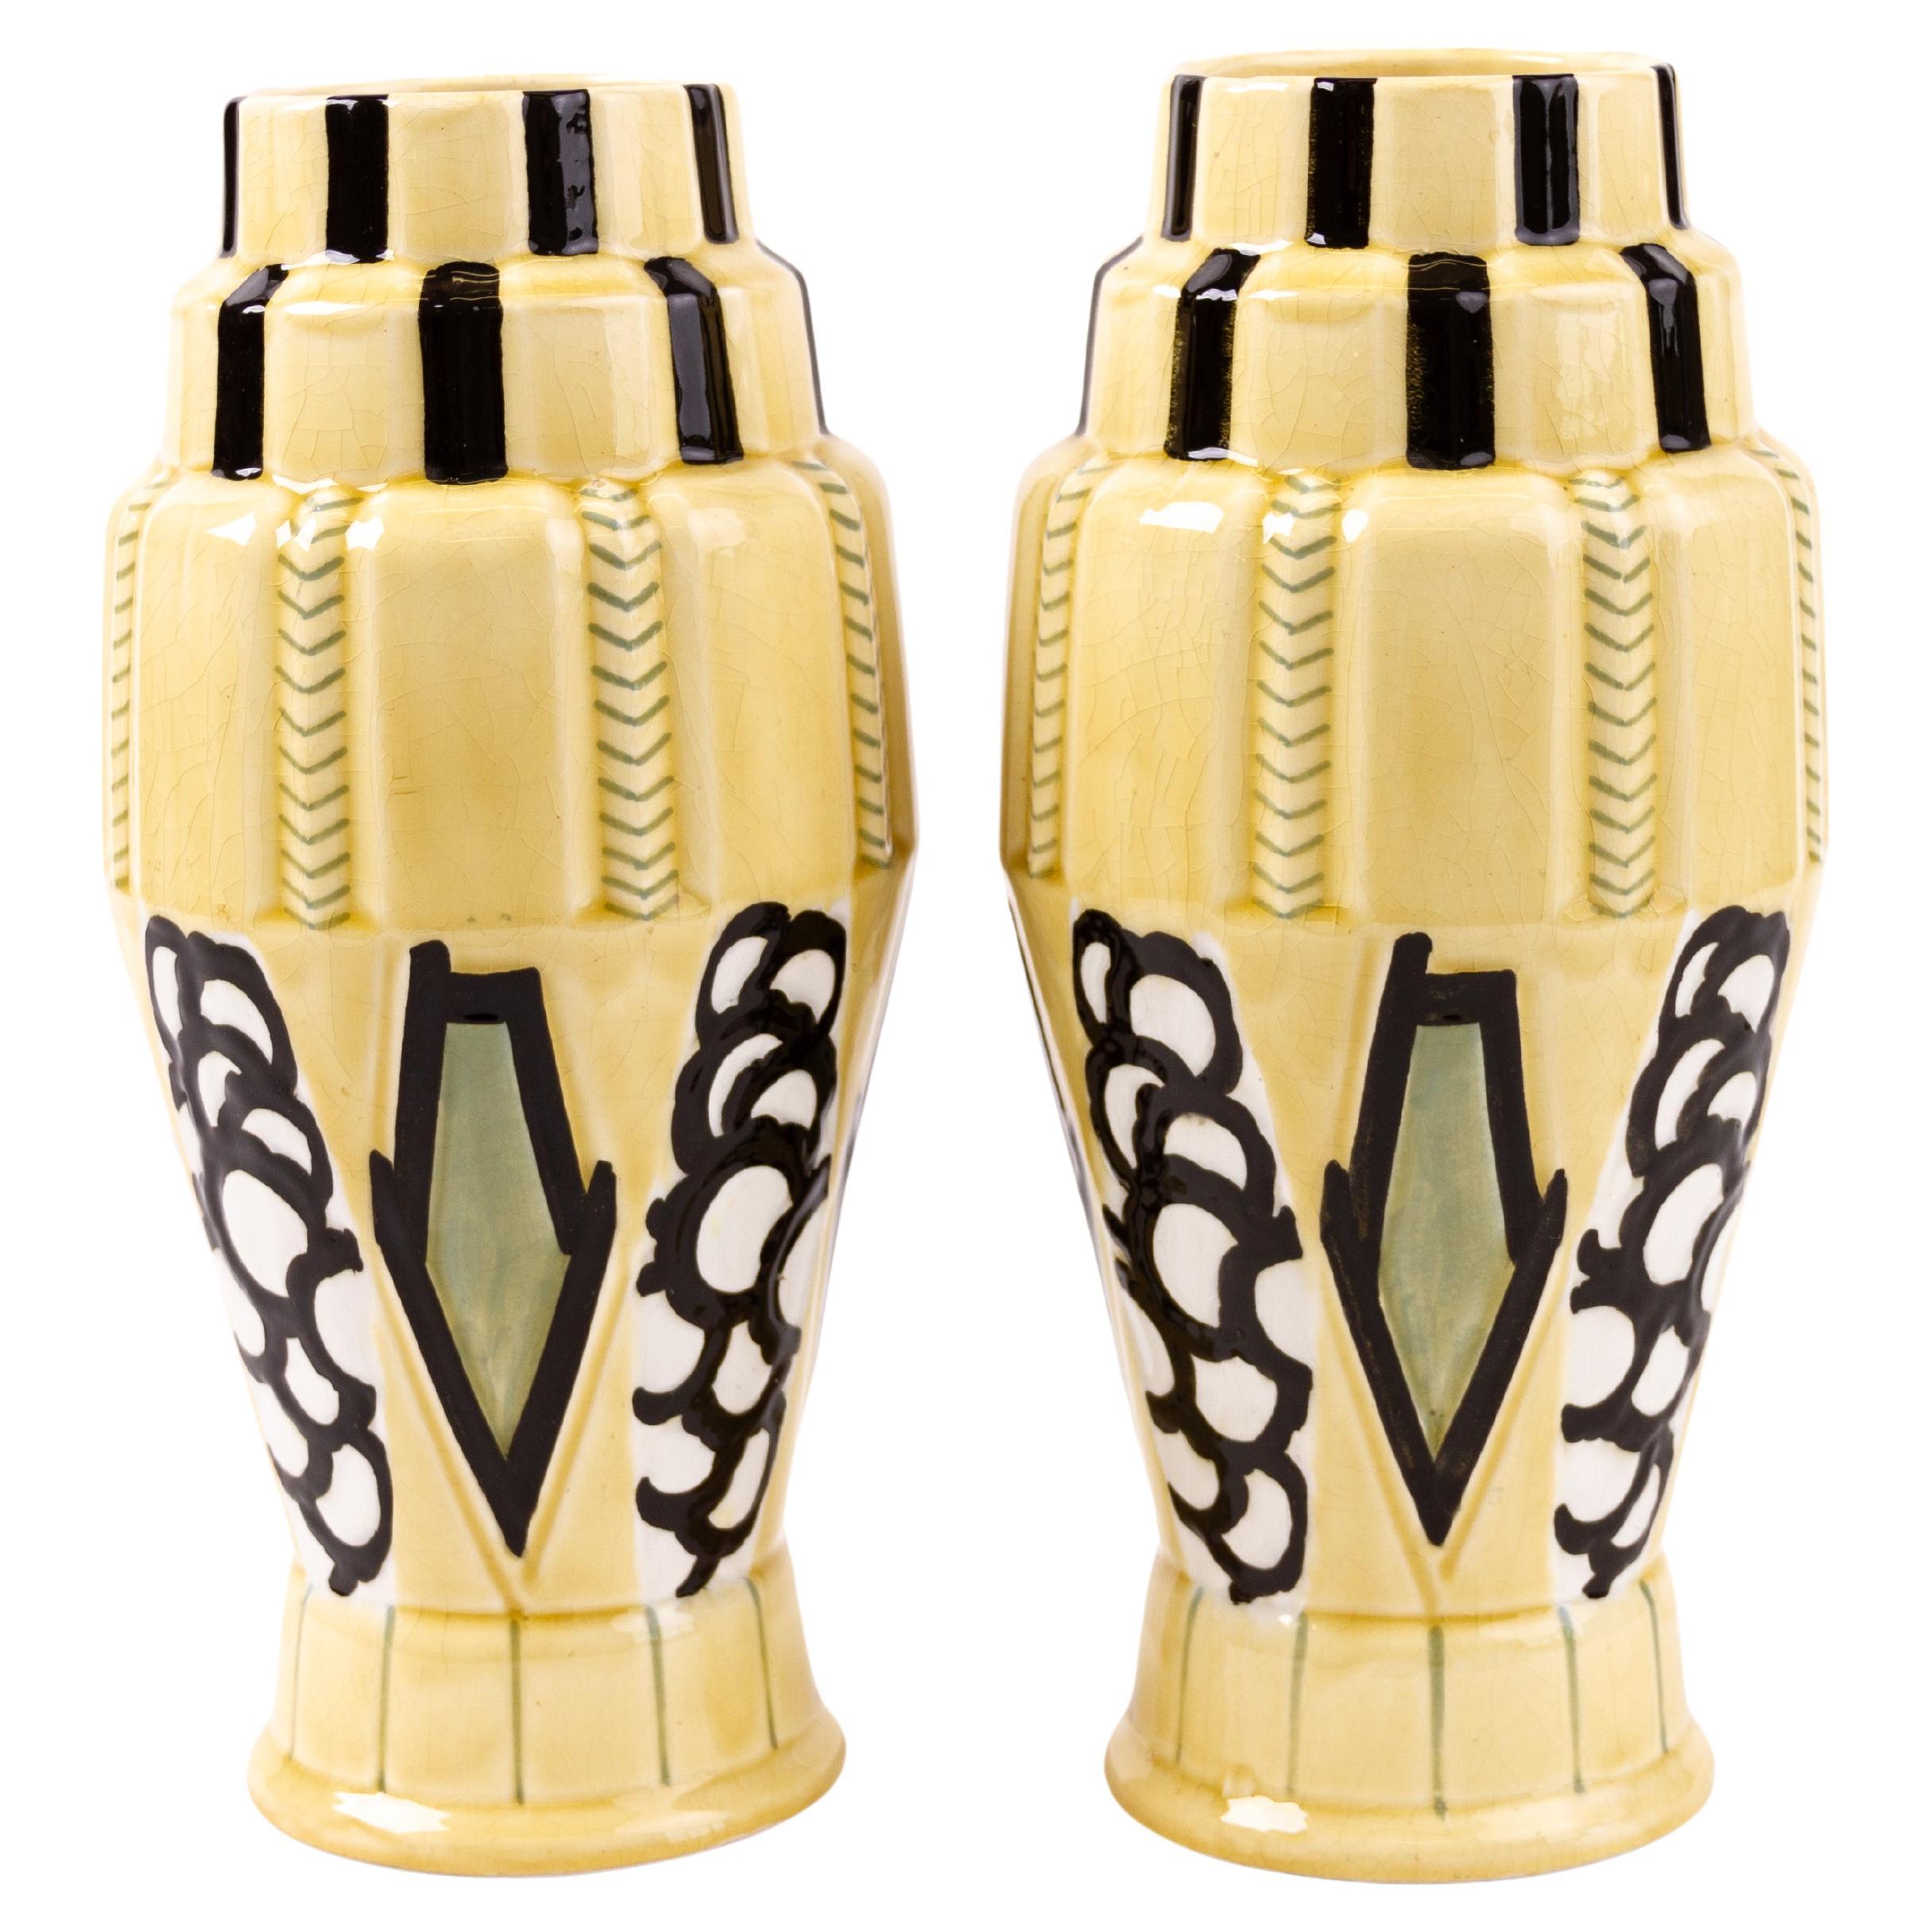 Pair of 1930s French Art Deco Faience Ceramic Vases by Orchies  For Sale